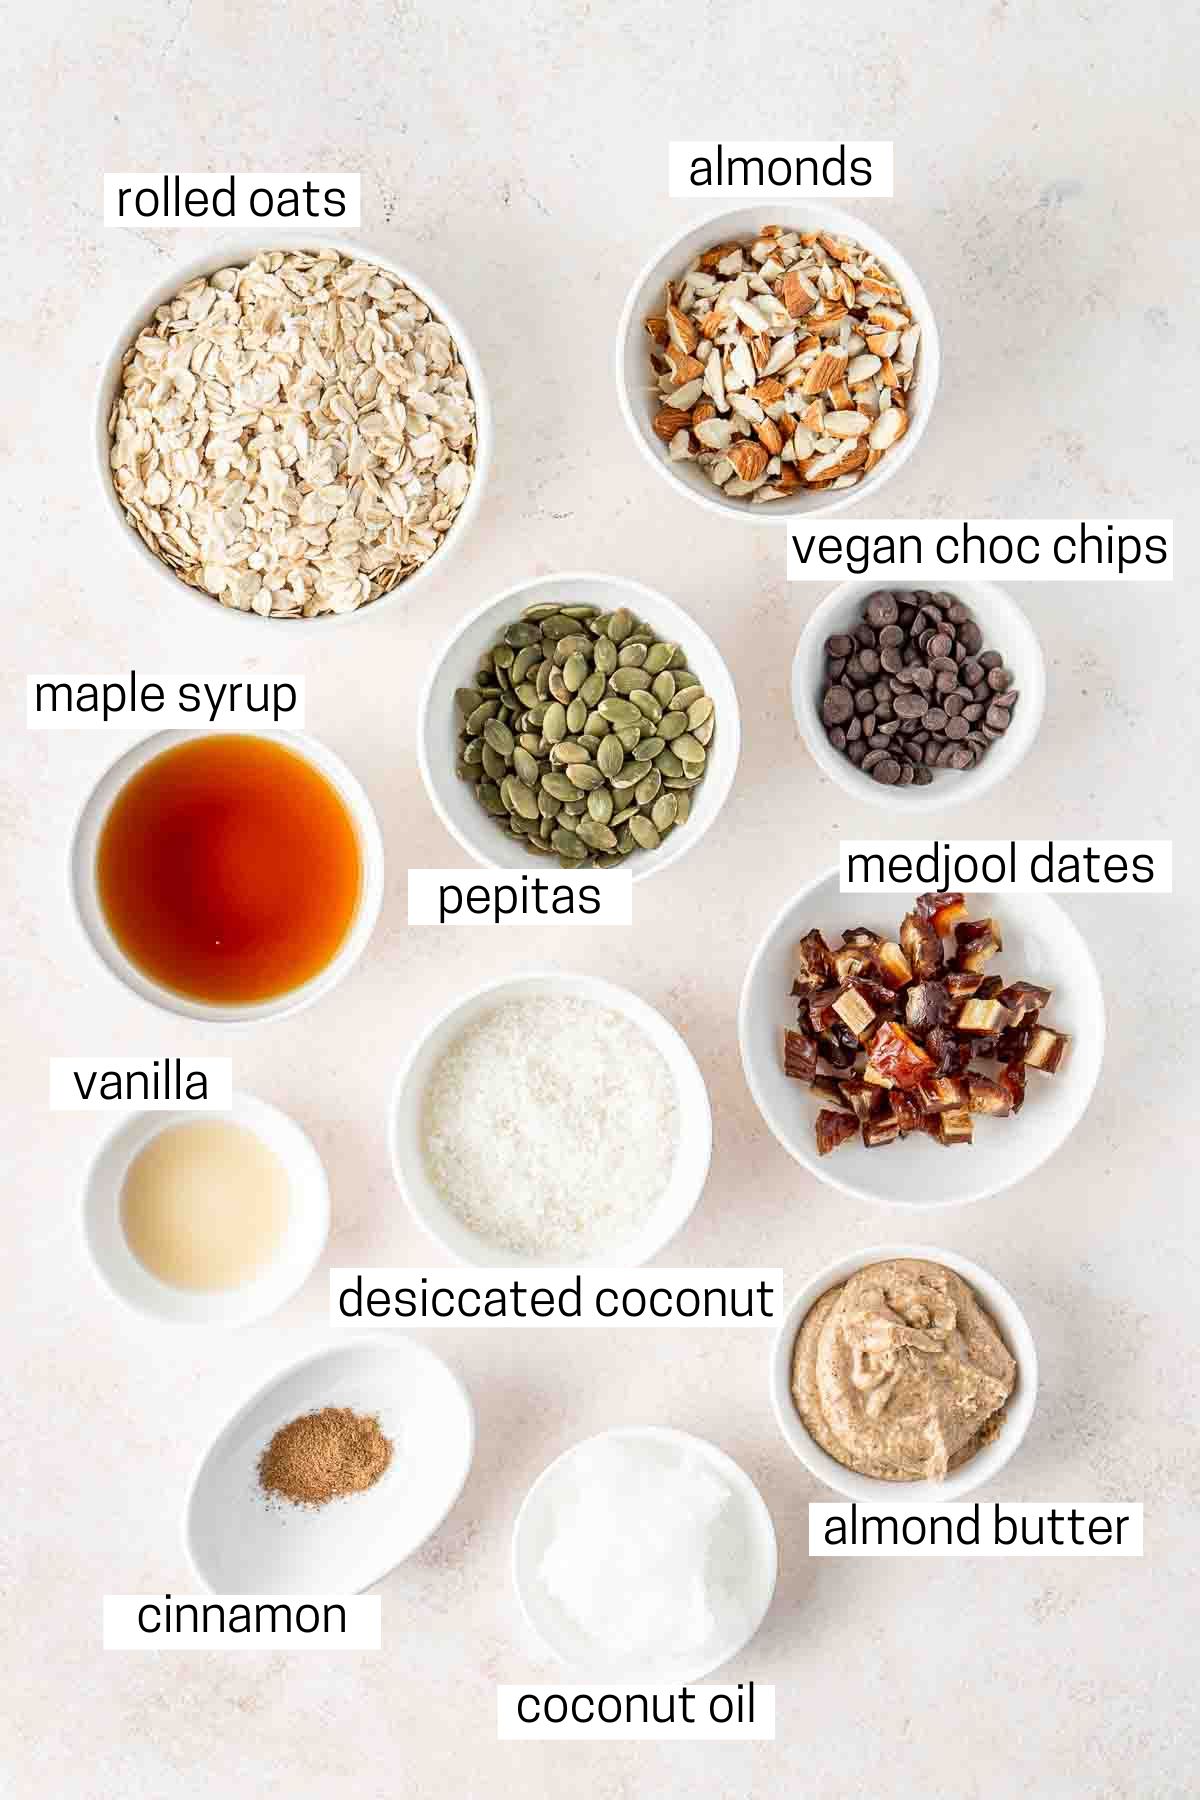 All ingredients needed to make homemade granola bars.